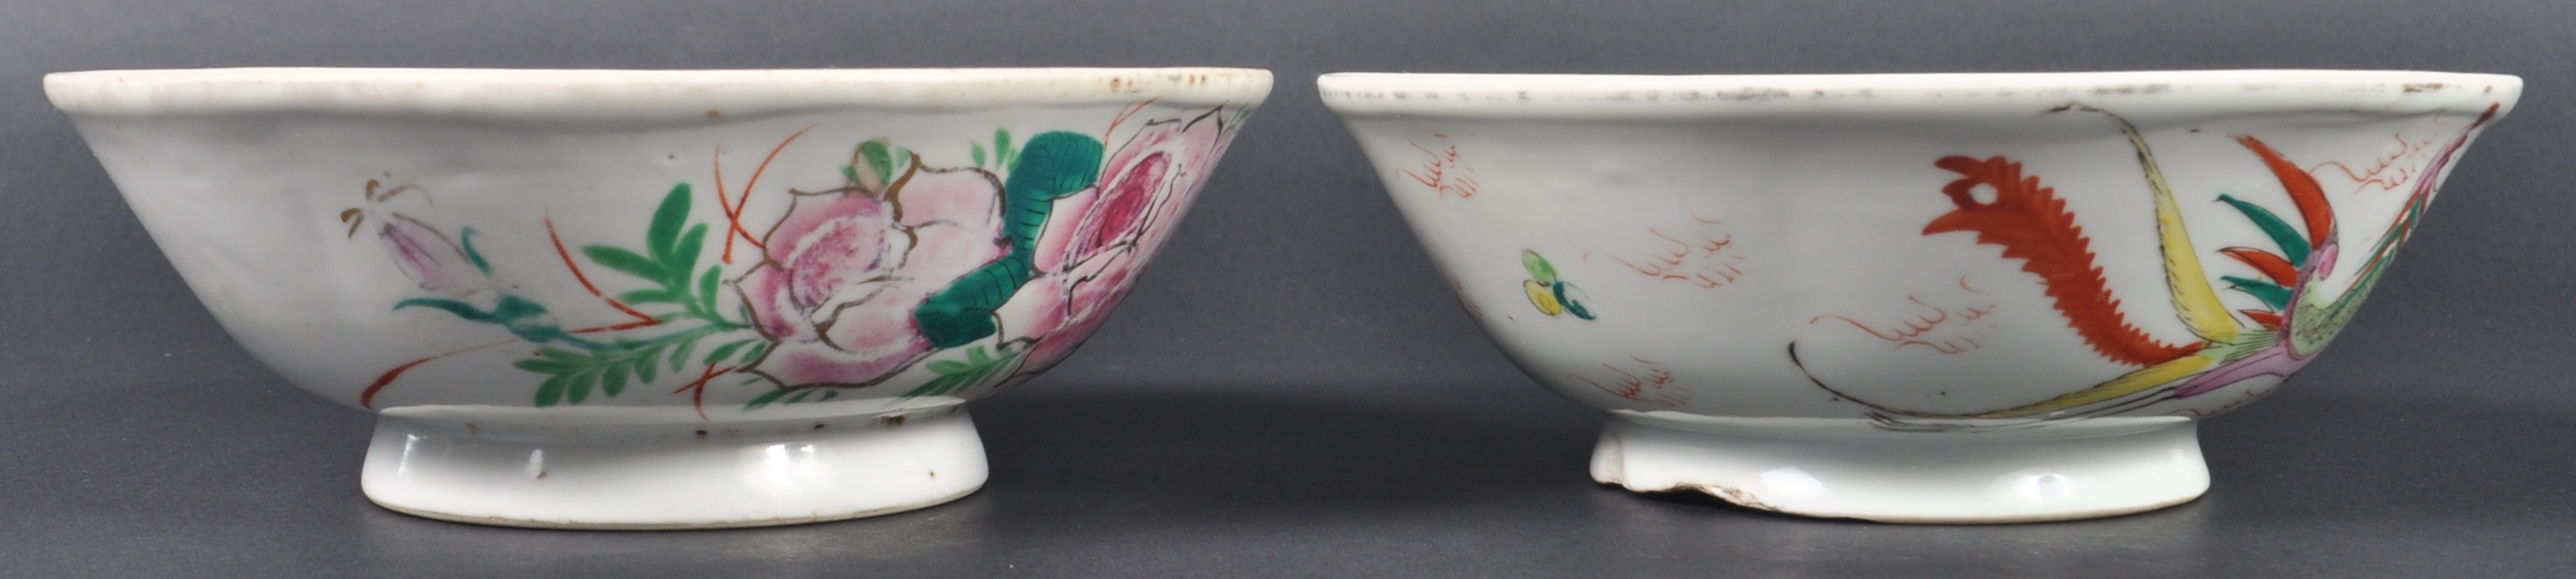 TWO 19TH CENTURY CHINESE PORCELAIN BOWLS - Image 6 of 7